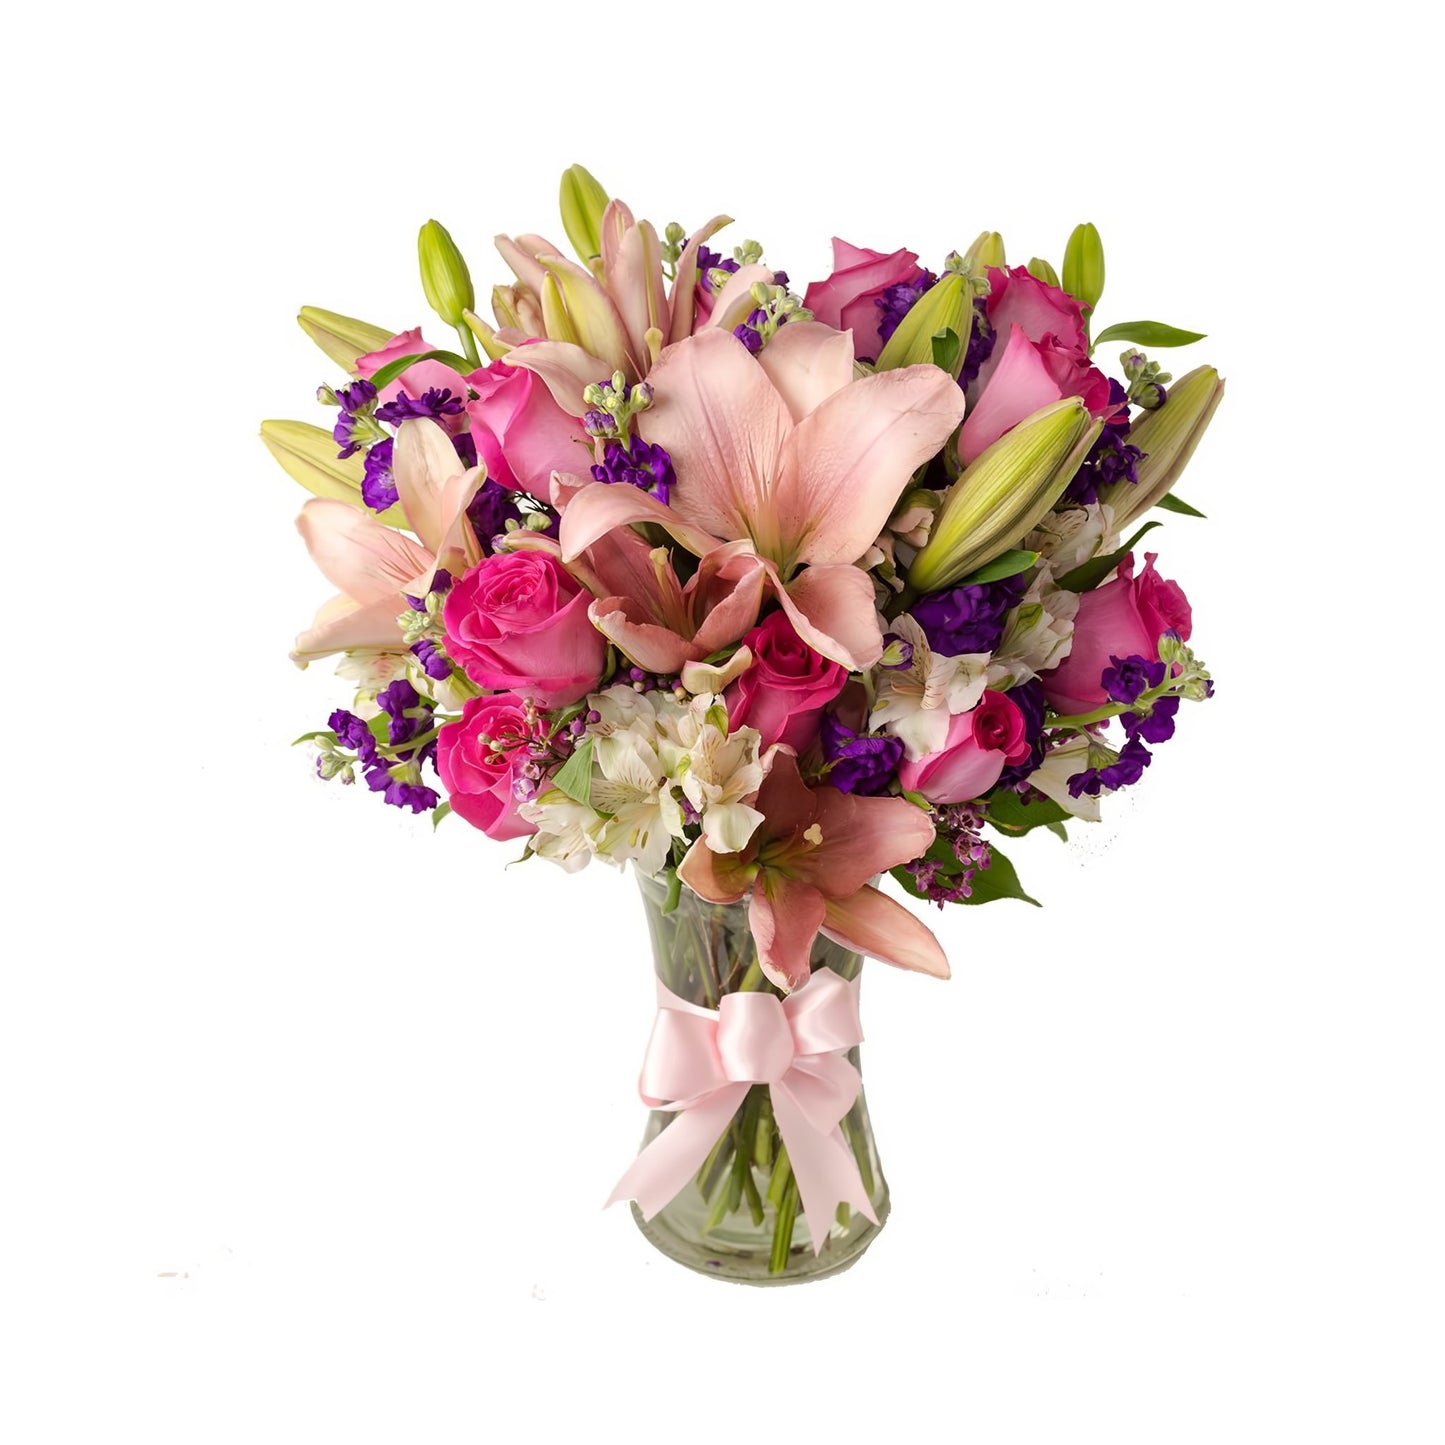 Sweetheart Lovely - Floral Arrangement - Flower Delivery Brooklyn